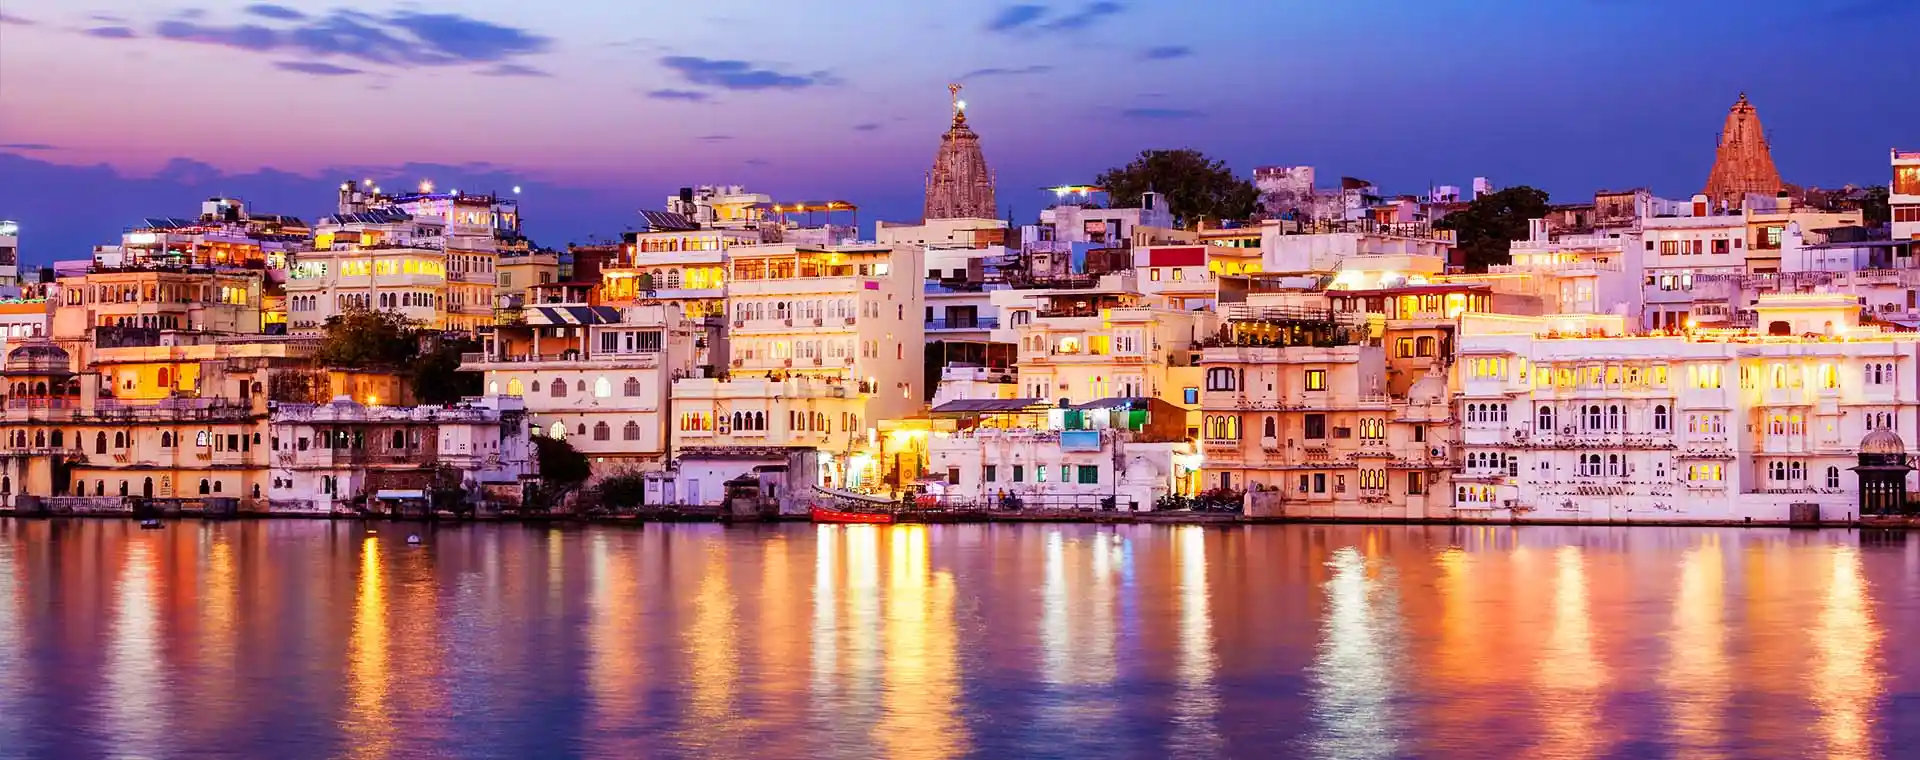 Historical Places in Udaipur